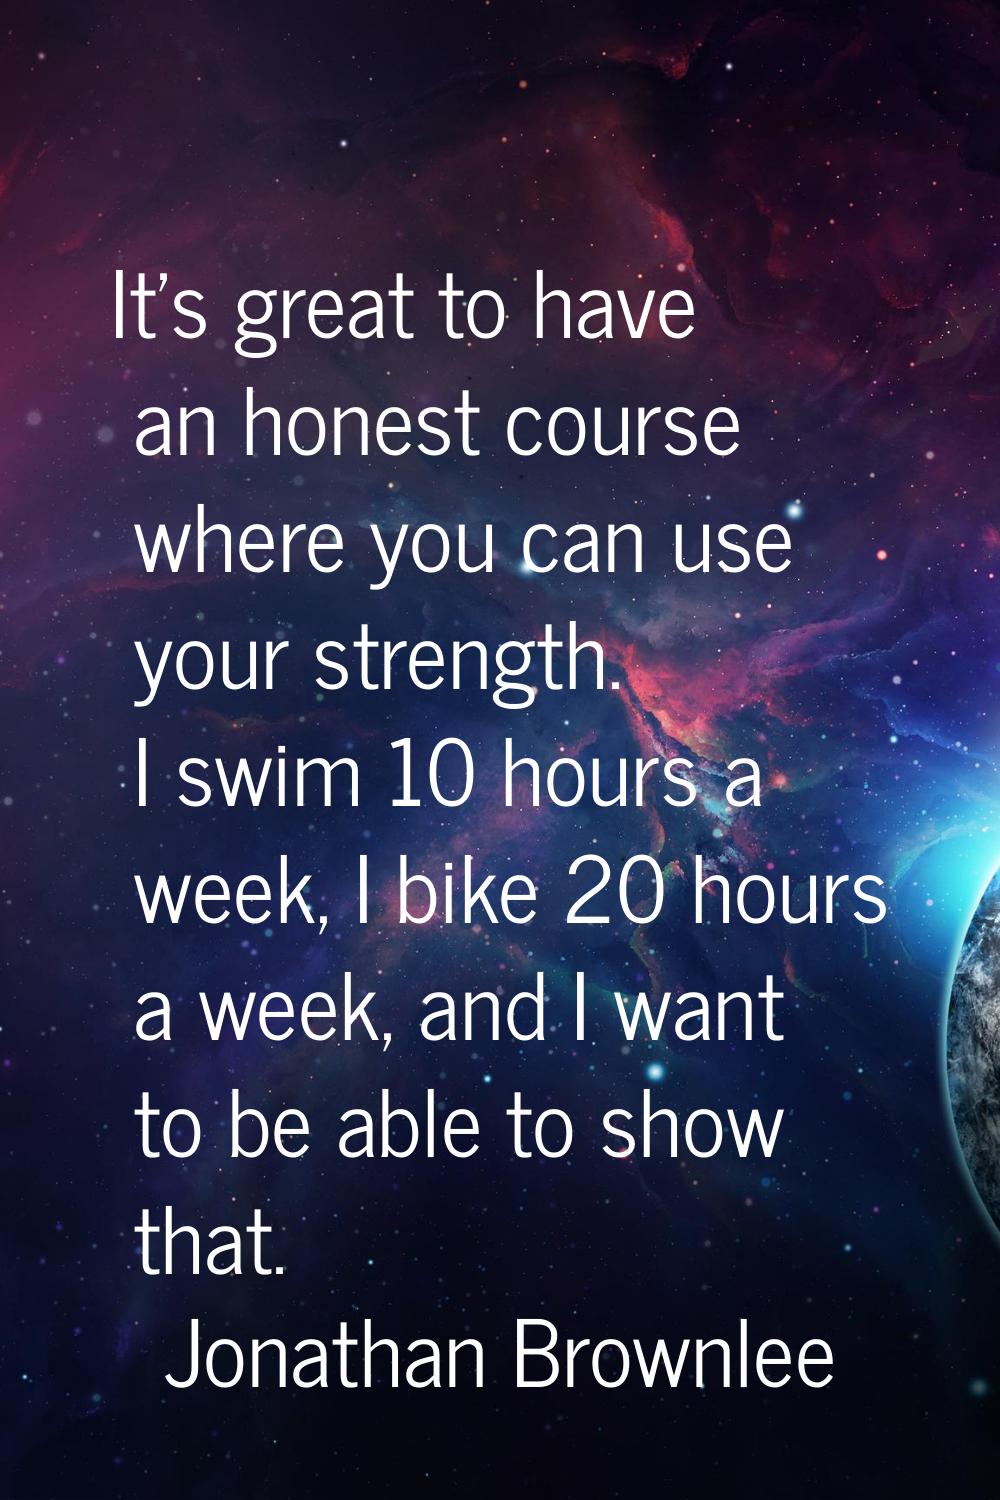 It's great to have an honest course where you can use your strength. I swim 10 hours a week, I bike